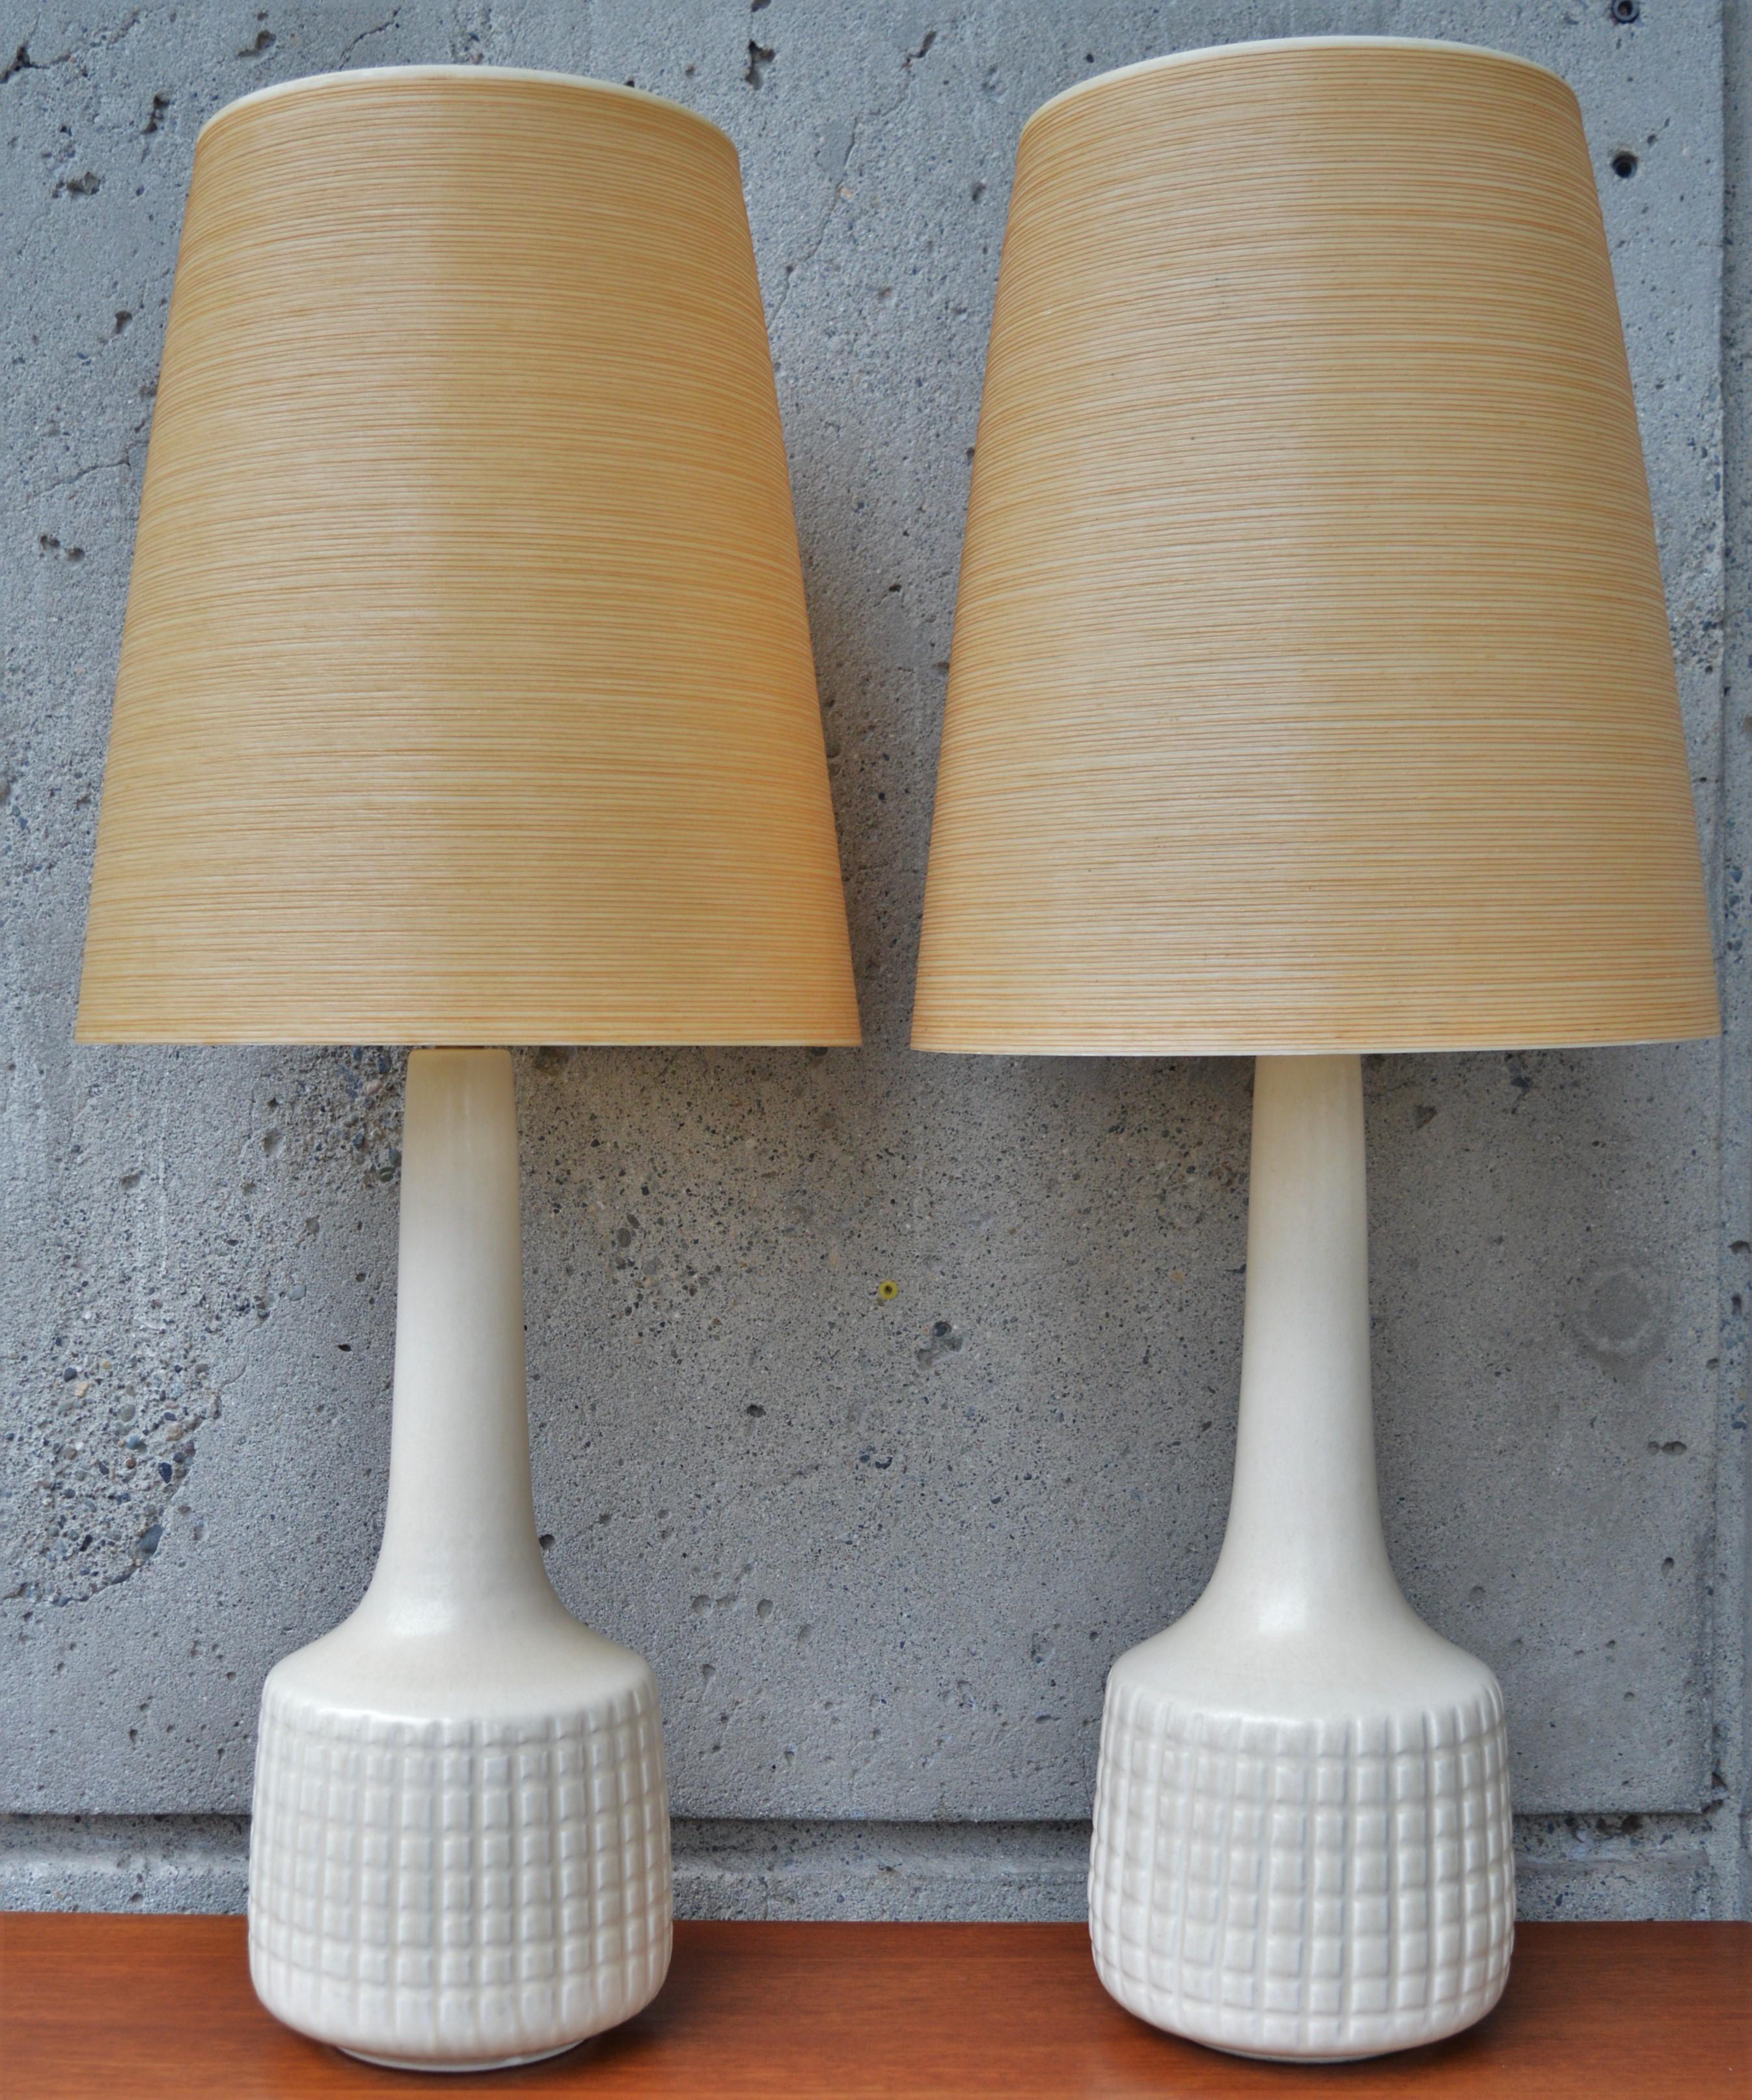 These sculptural ceramic lamps were designed and created by Lotte and Gunnar Bostlund, a Danish born couple who moved their lamp making company to Canada in the 1960s. The lamps are in a gorgeous off white and flare at the base and then taper gently